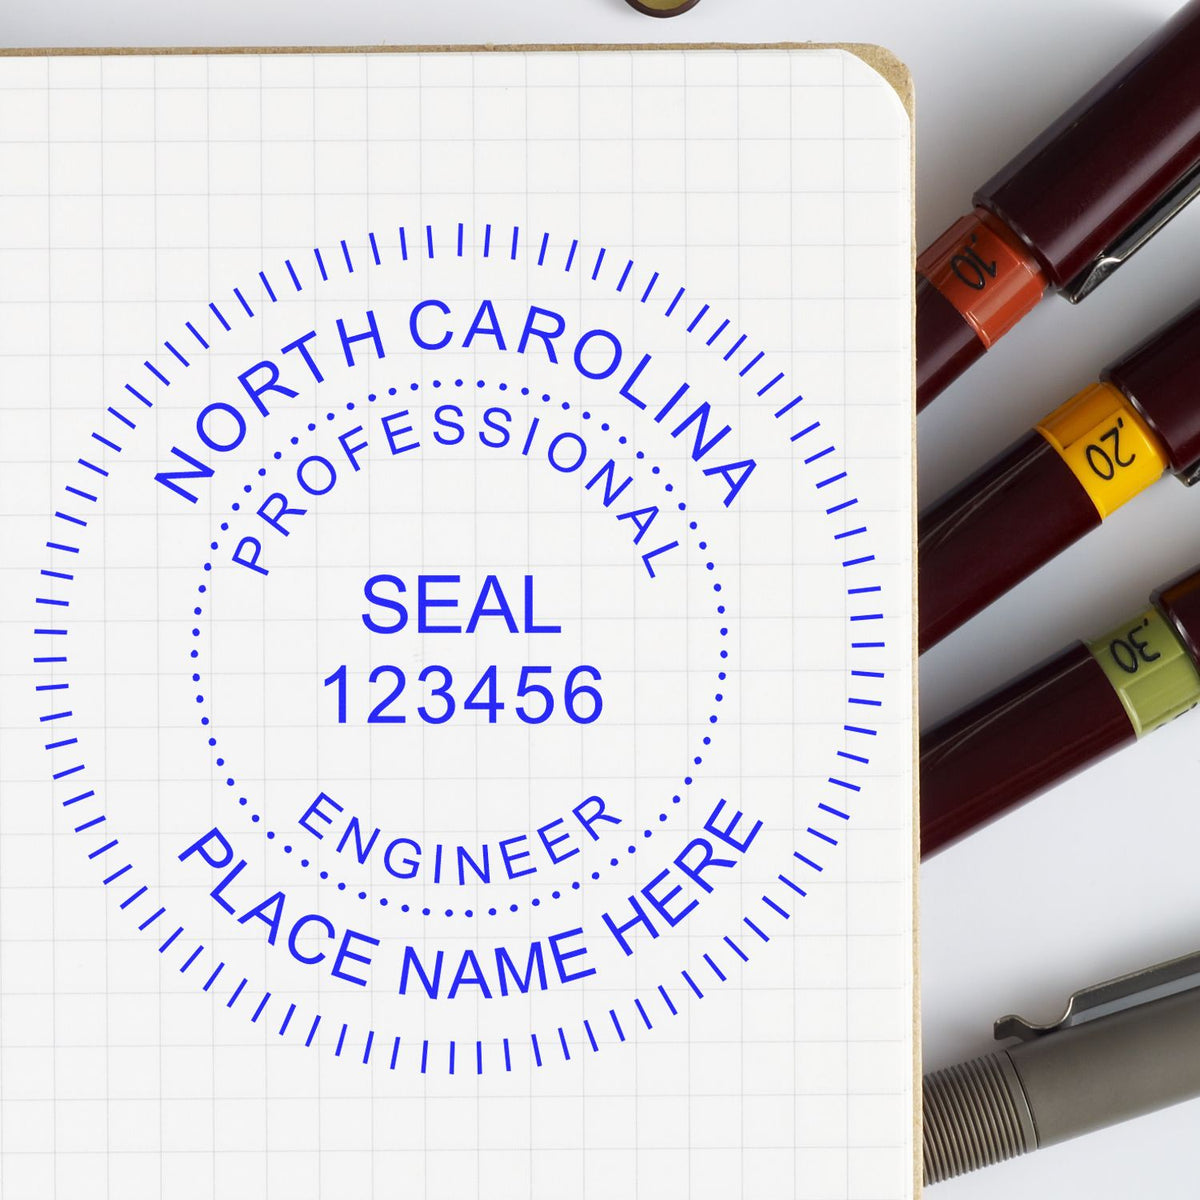 The Self-Inking North Carolina PE Stamp stamp impression comes to life with a crisp, detailed photo on paper - showcasing true professional quality.